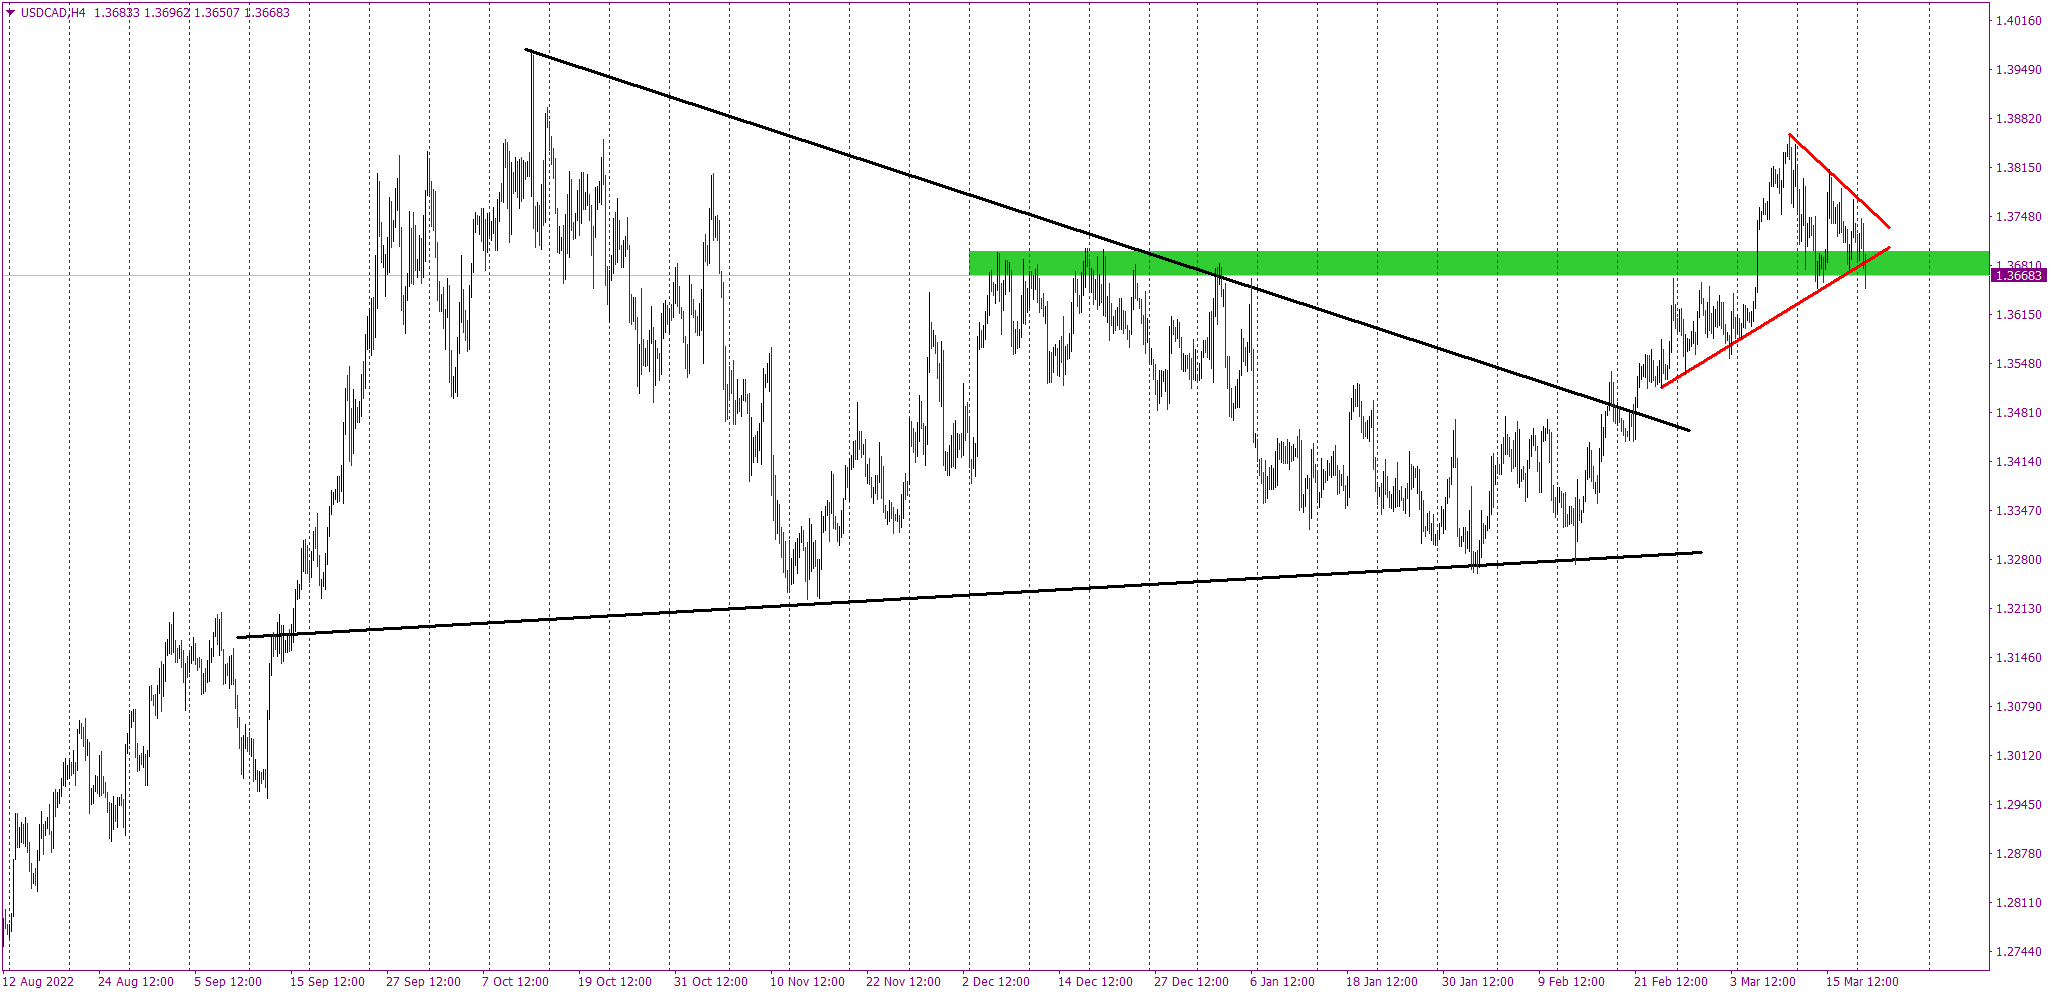 USDCAD expects crazy week inside pennant formation